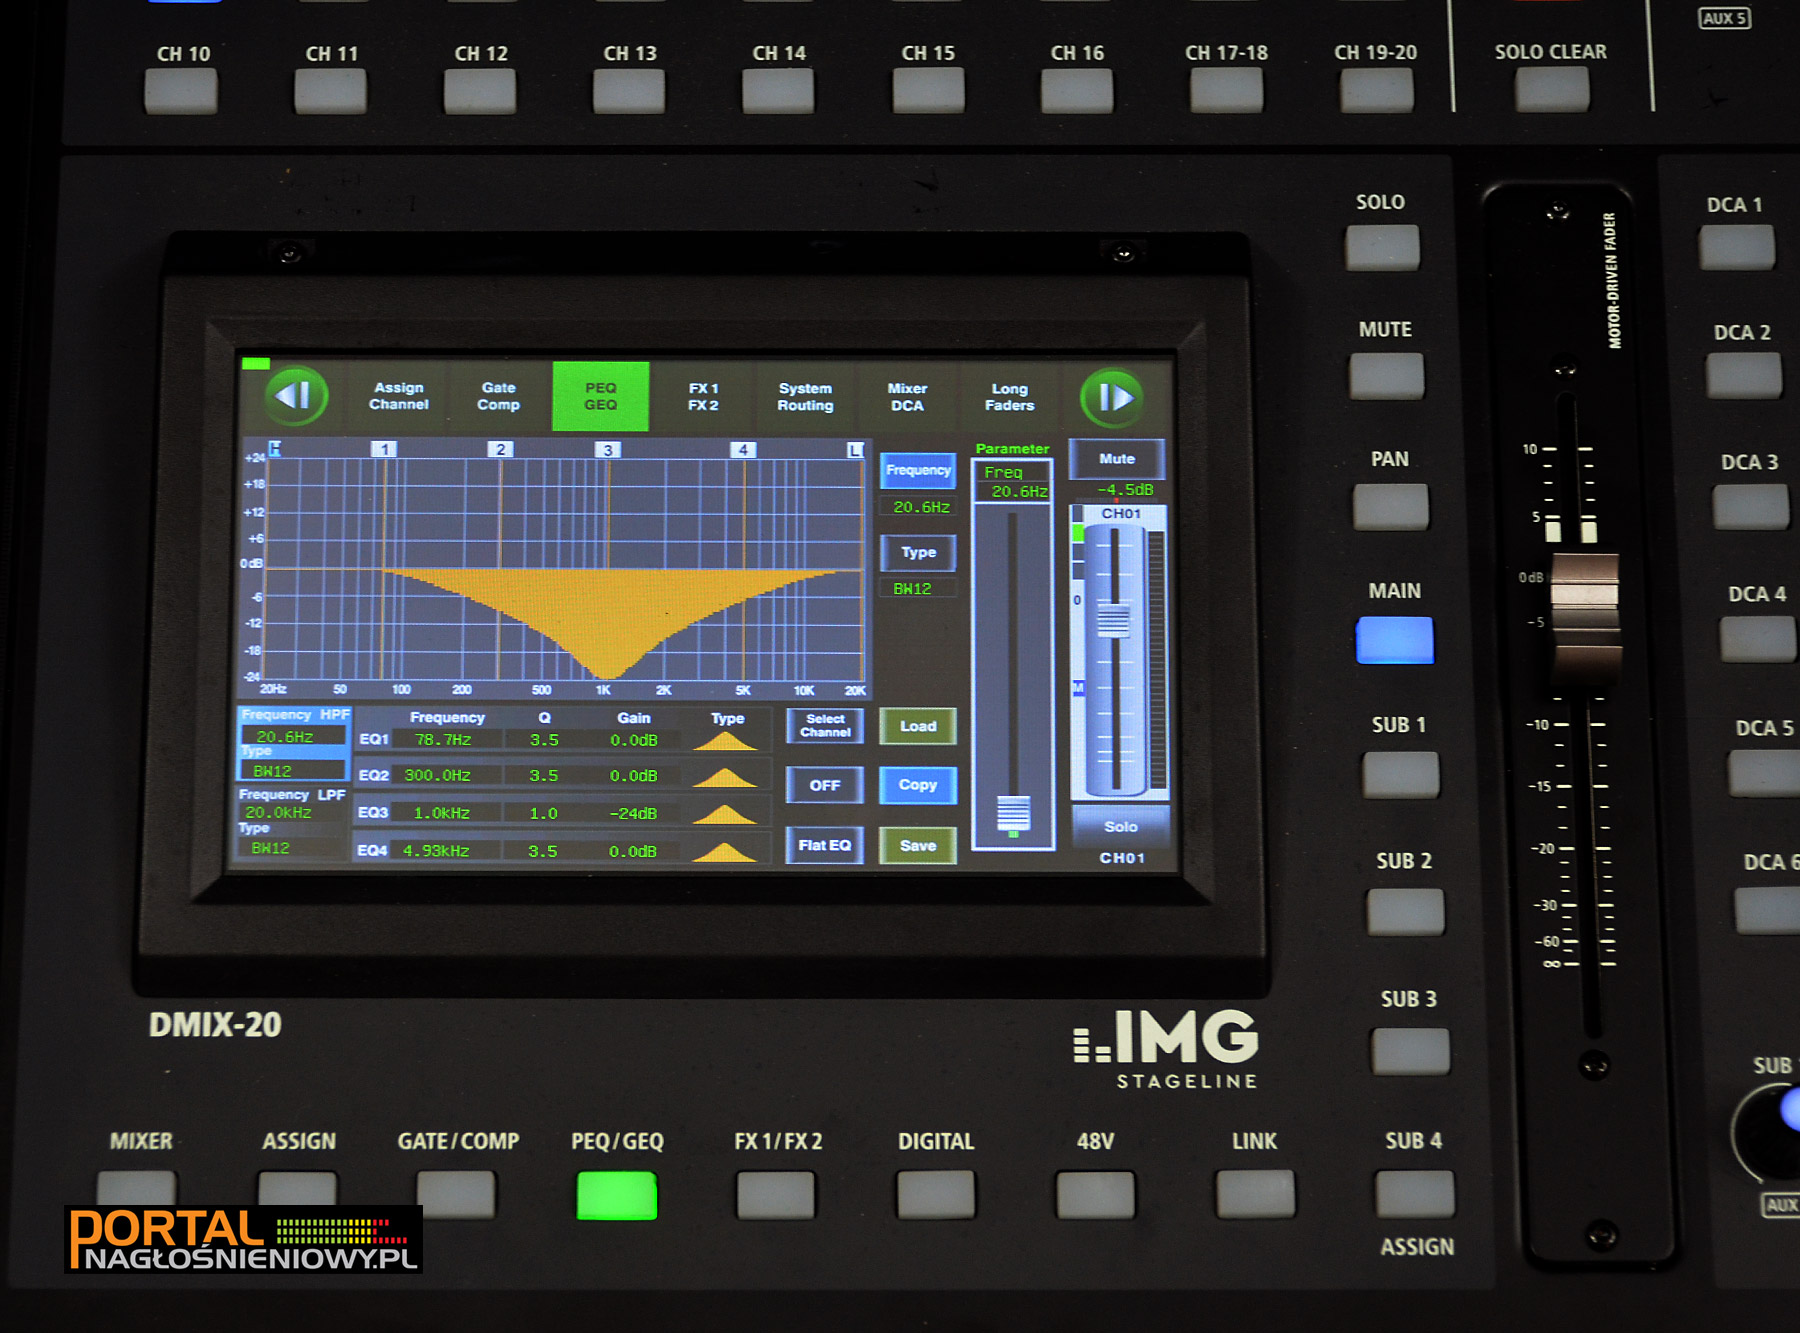 IMG-STAGELINE-DMIX-20-LCD-EQ-panel